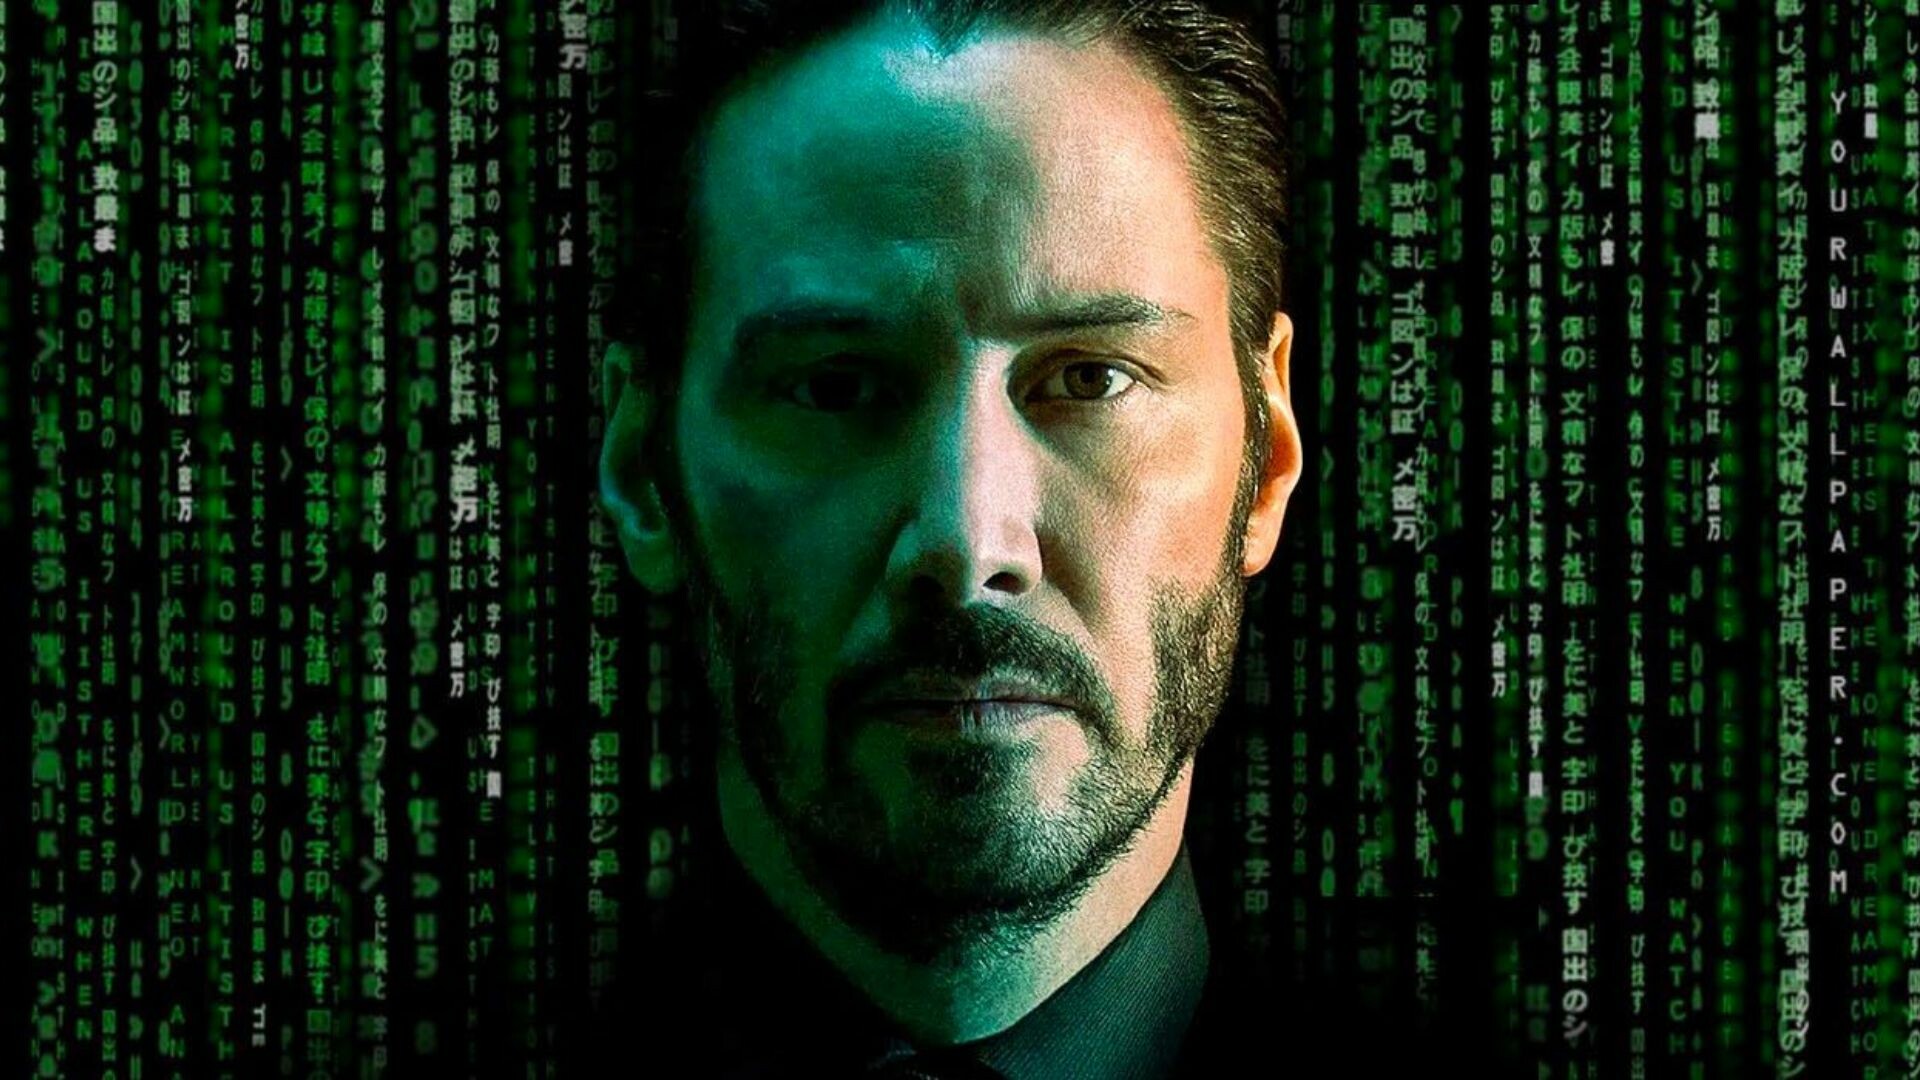 Matrix Franchise: Neo, Lives a seemingly ordinary life as a video game developer having trouble with distinguishing fantasy from reality. 1920x1080 Full HD Background.